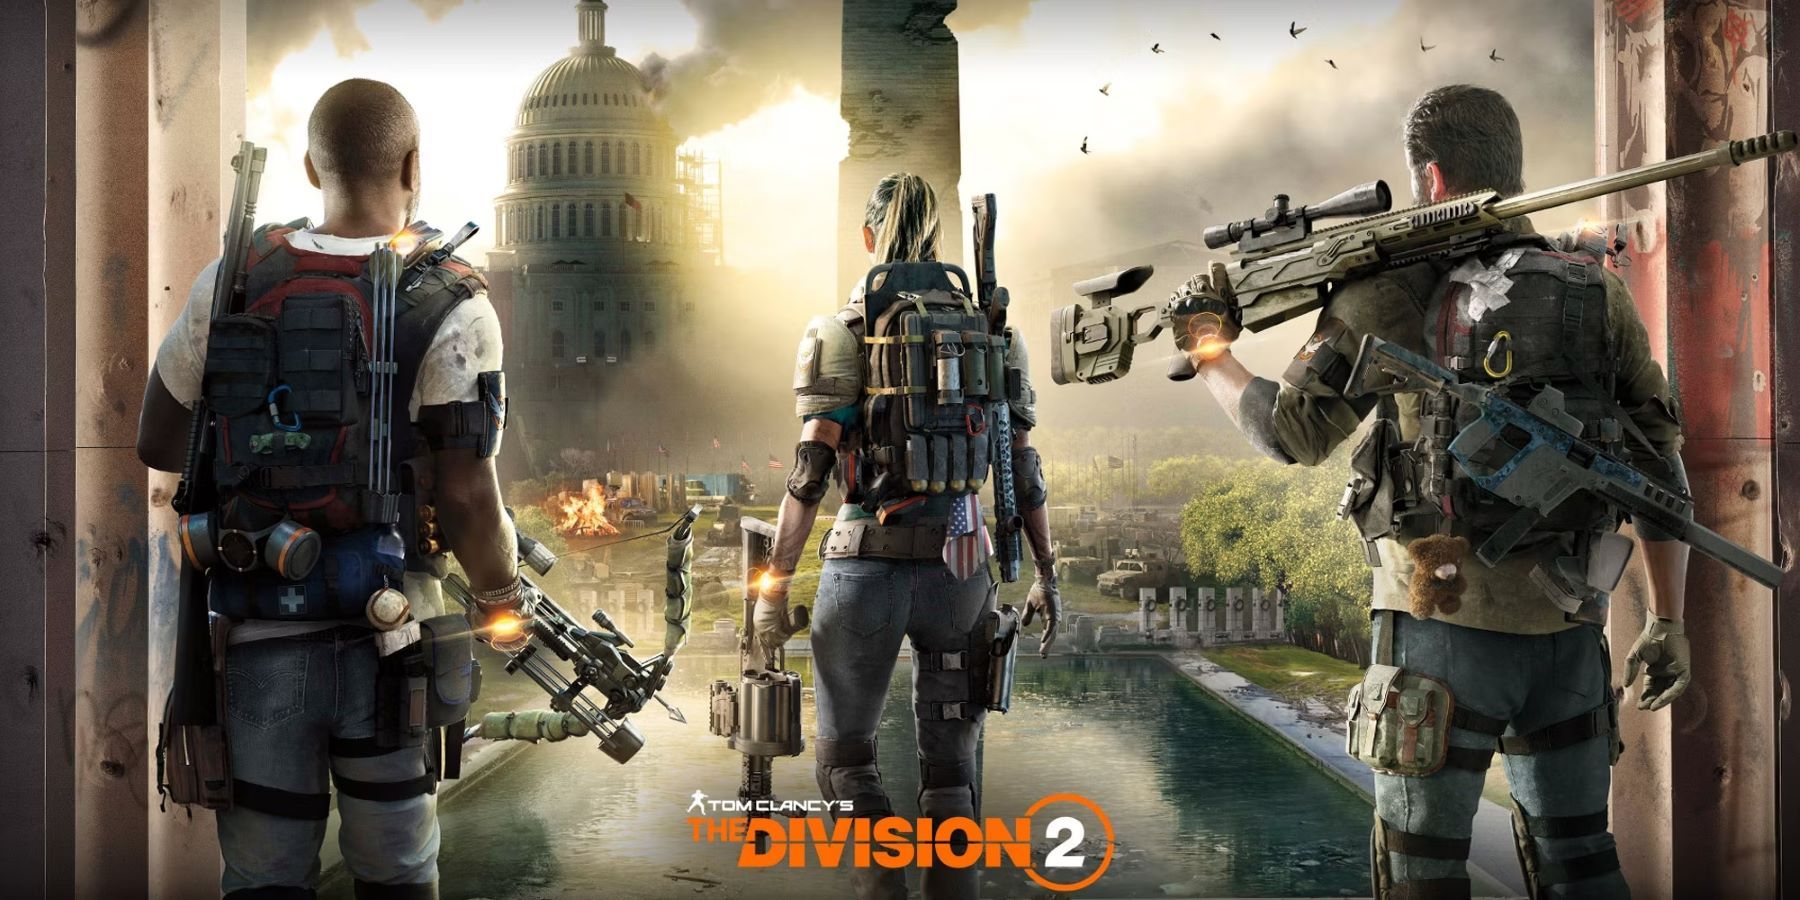 Official art for Tom Clancy's The Division 2